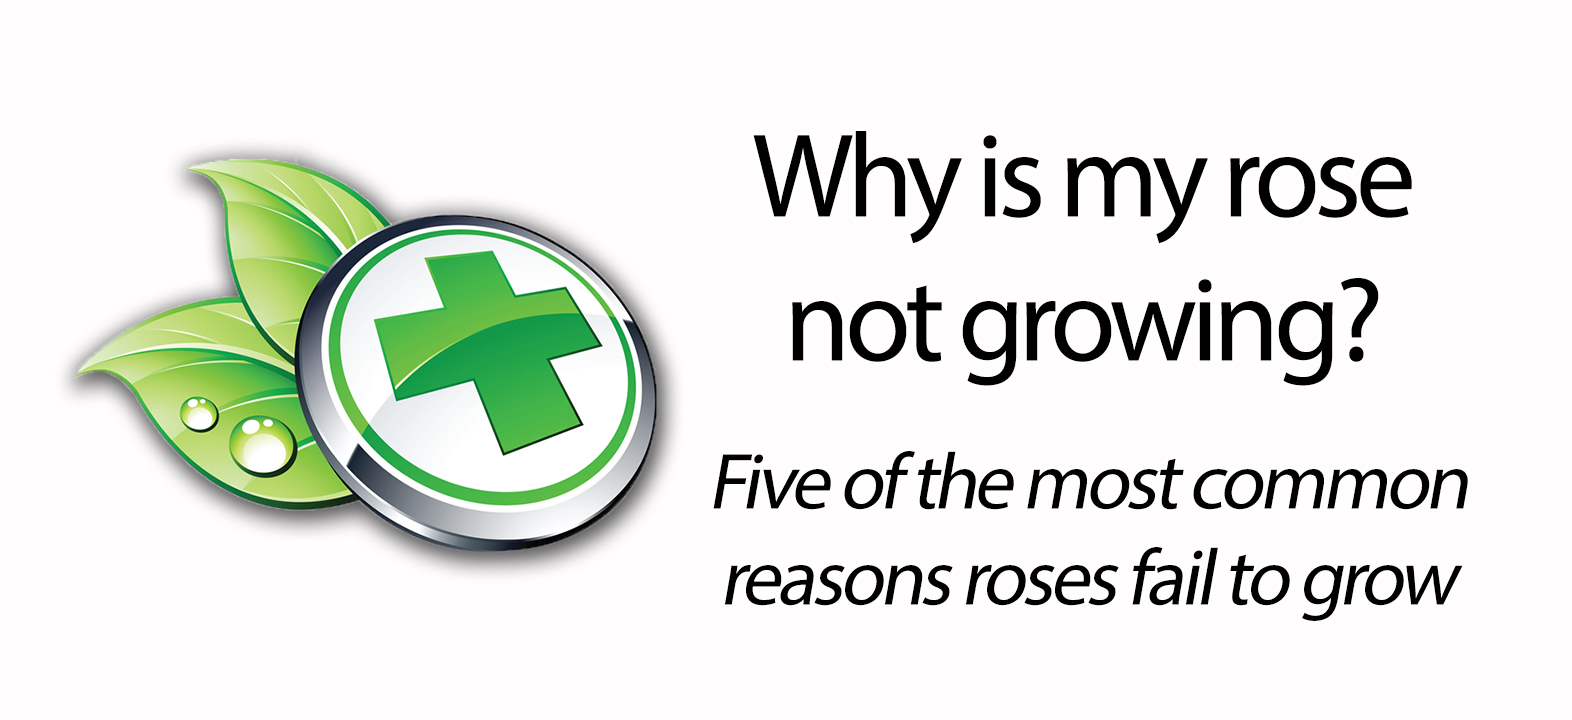 Common reasons for plant failure